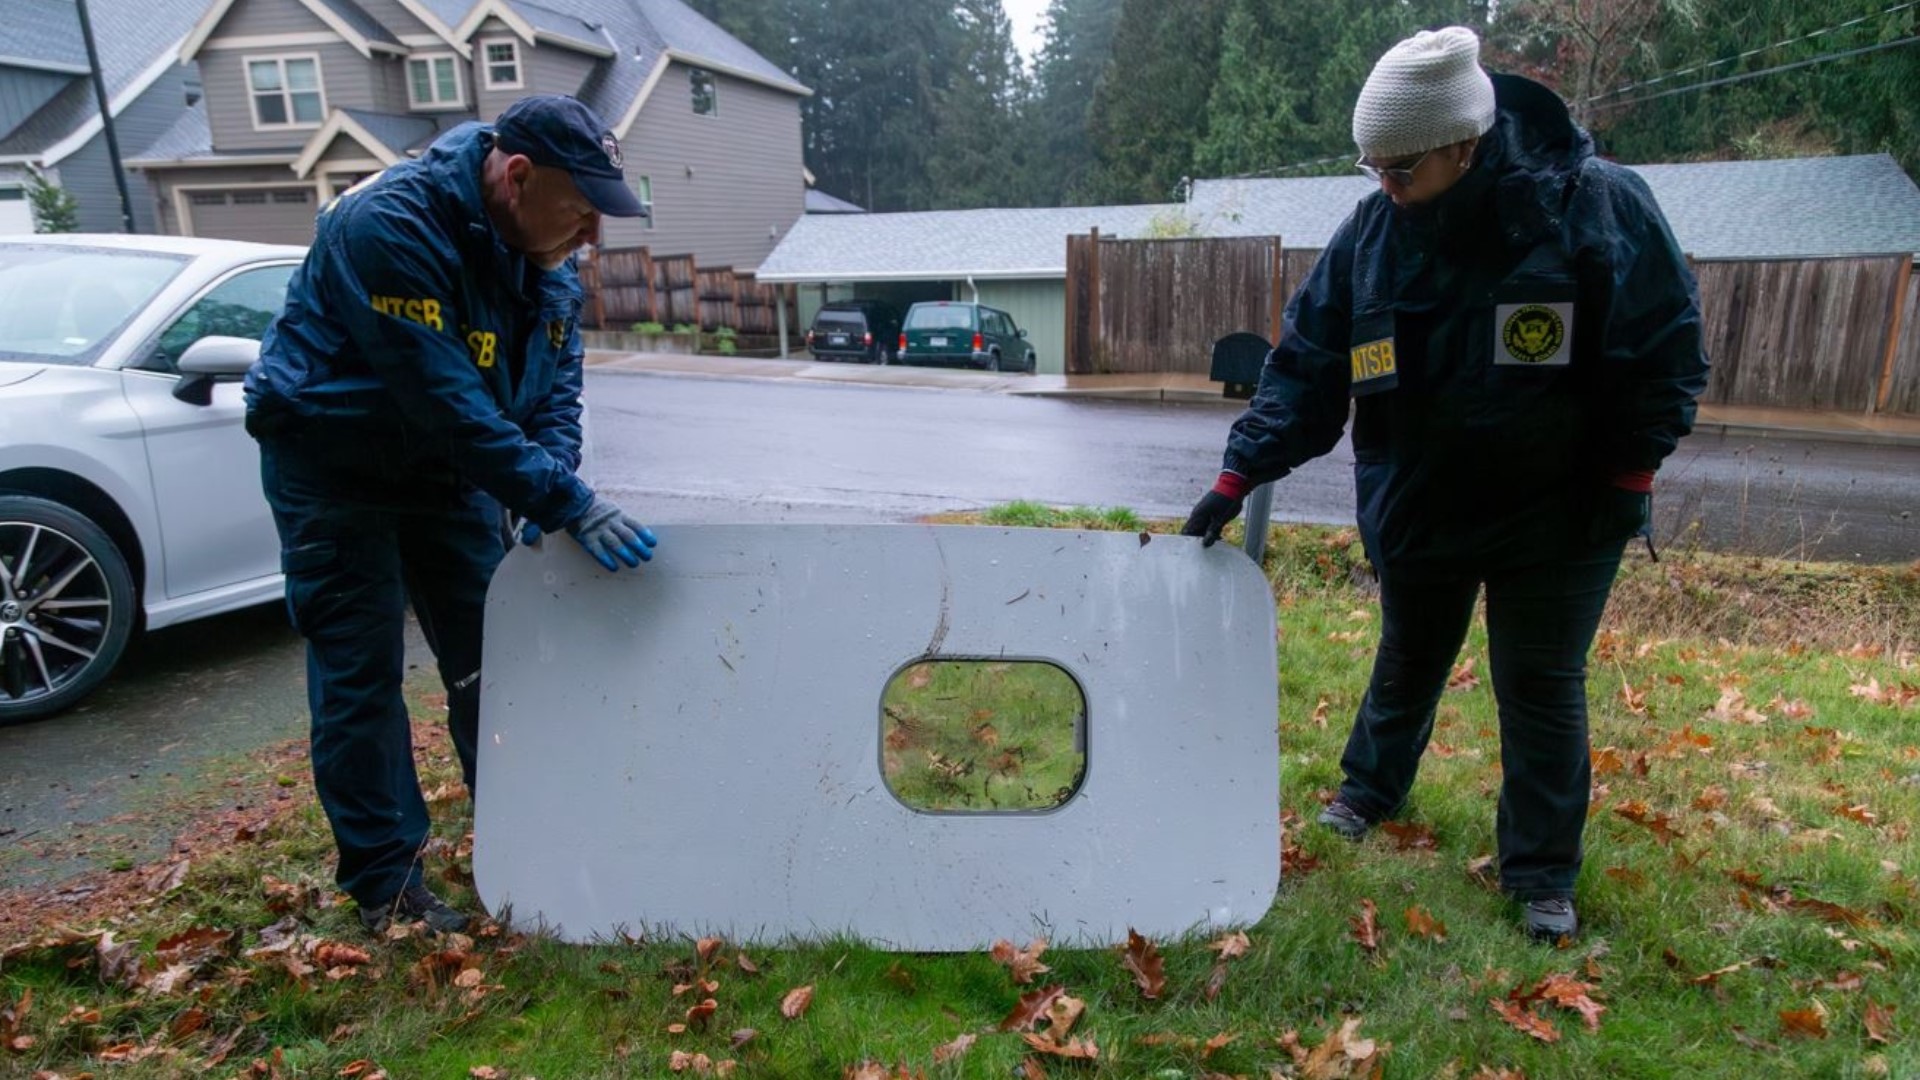 Two cellphones, a seat headrest and the door plug itself all turned up north of Beaverton in the days after Friday's explosive depressurization incident.